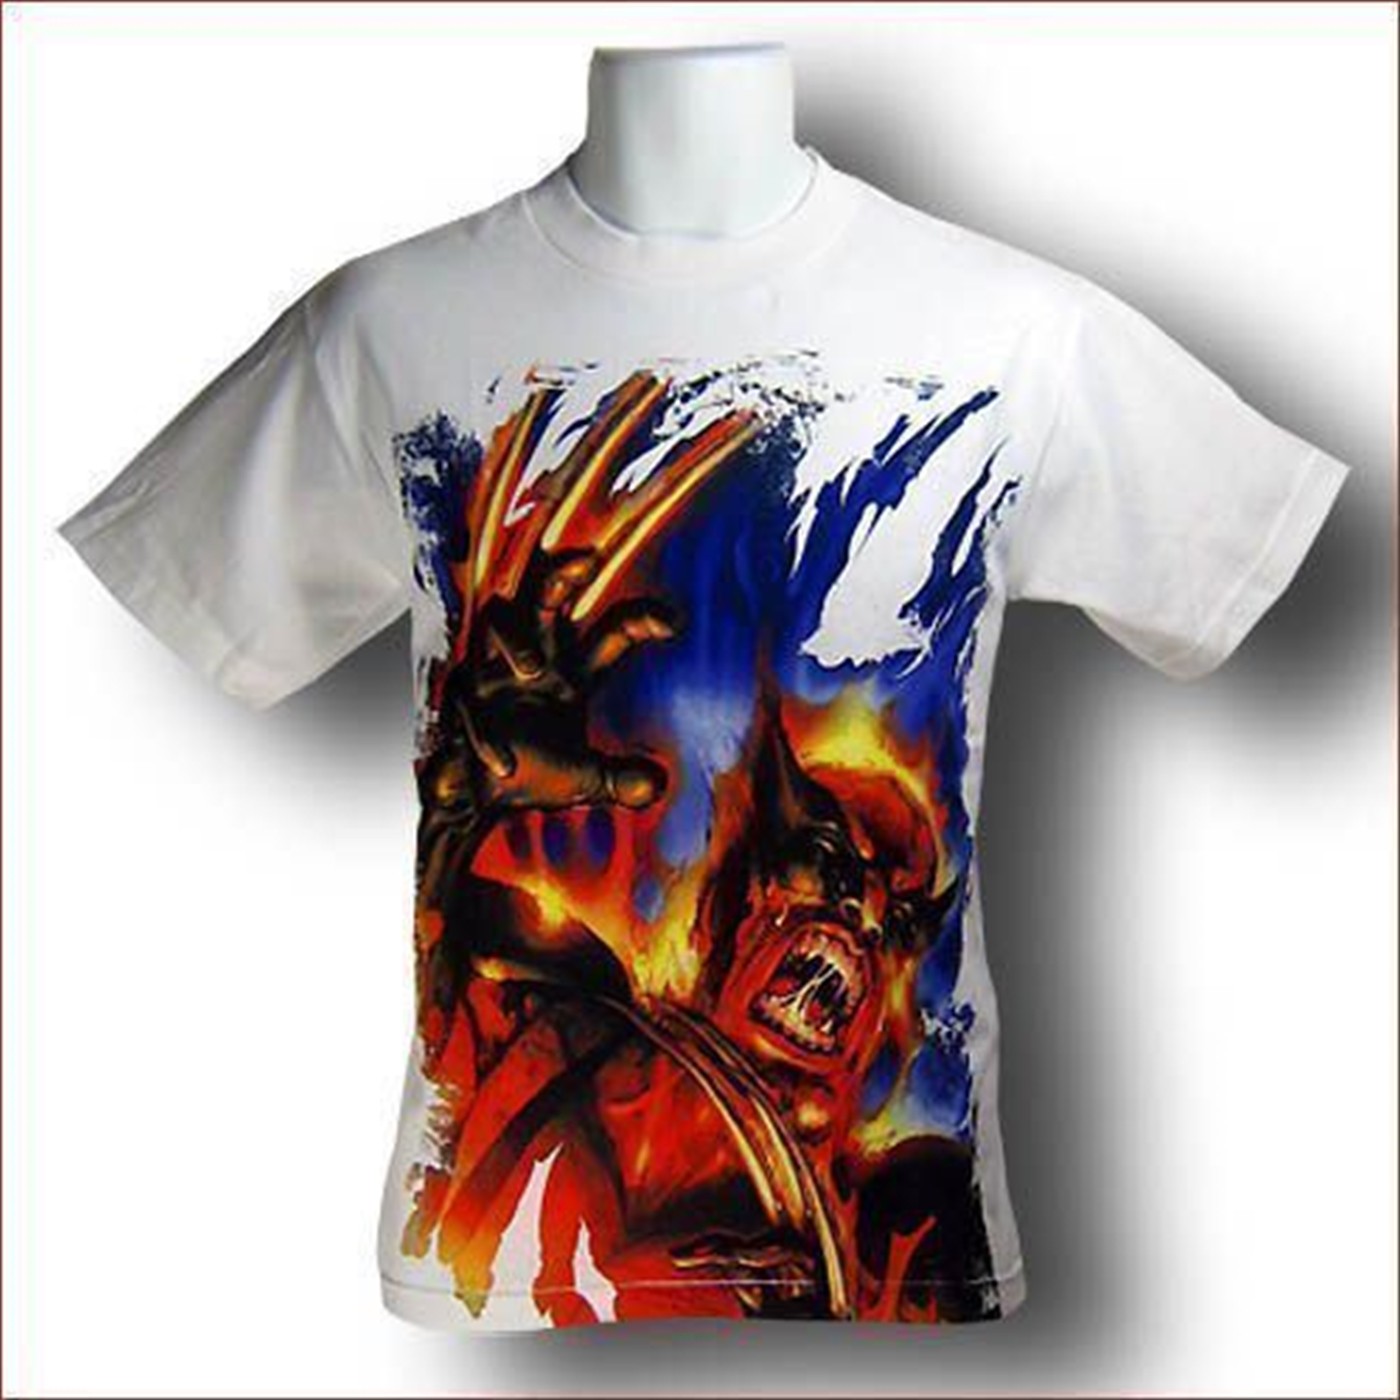 Wolverine T-Shirt On Fire